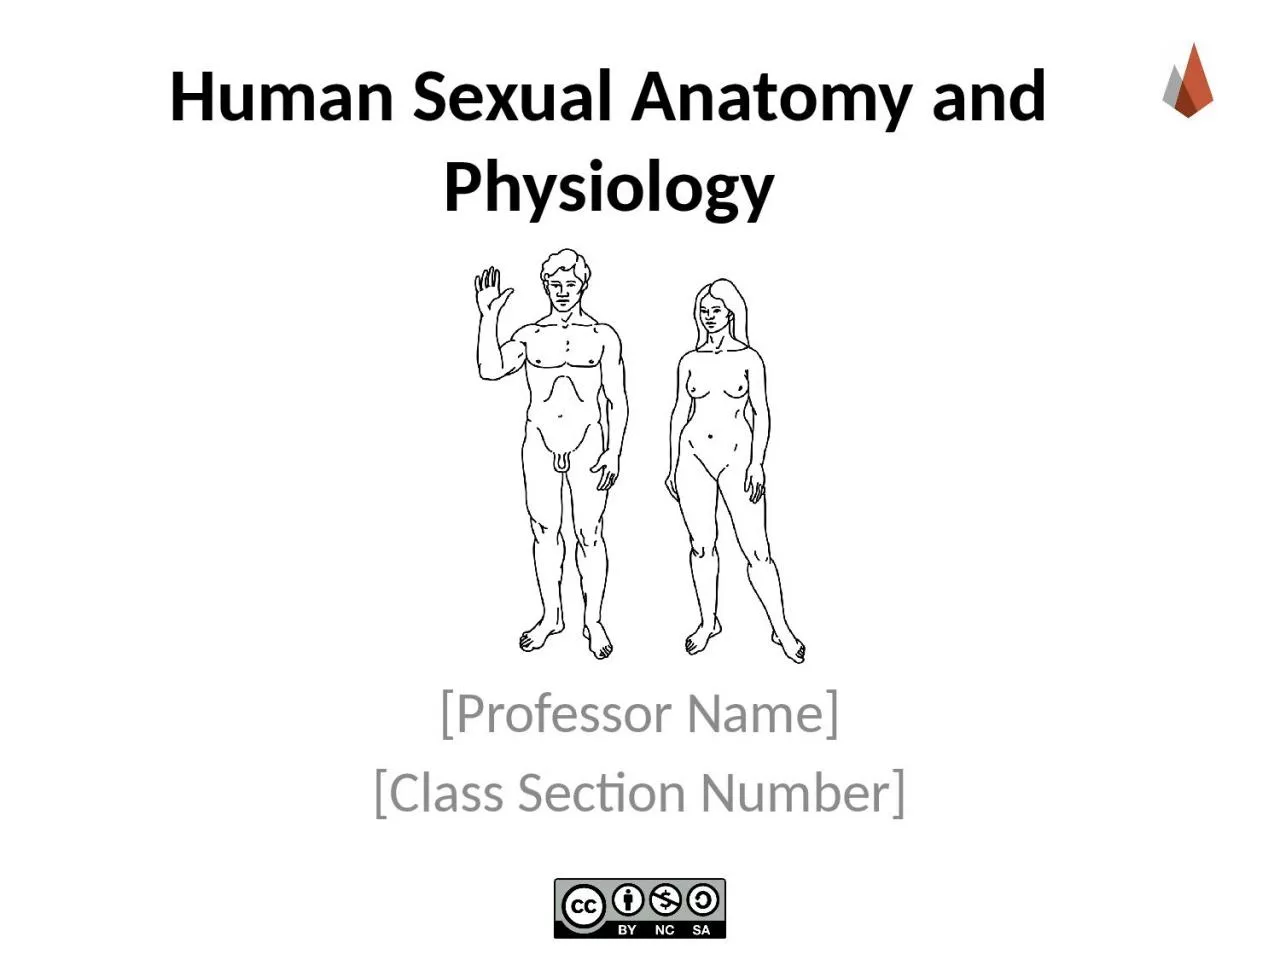 Human Sexual Anatomy and Physiology